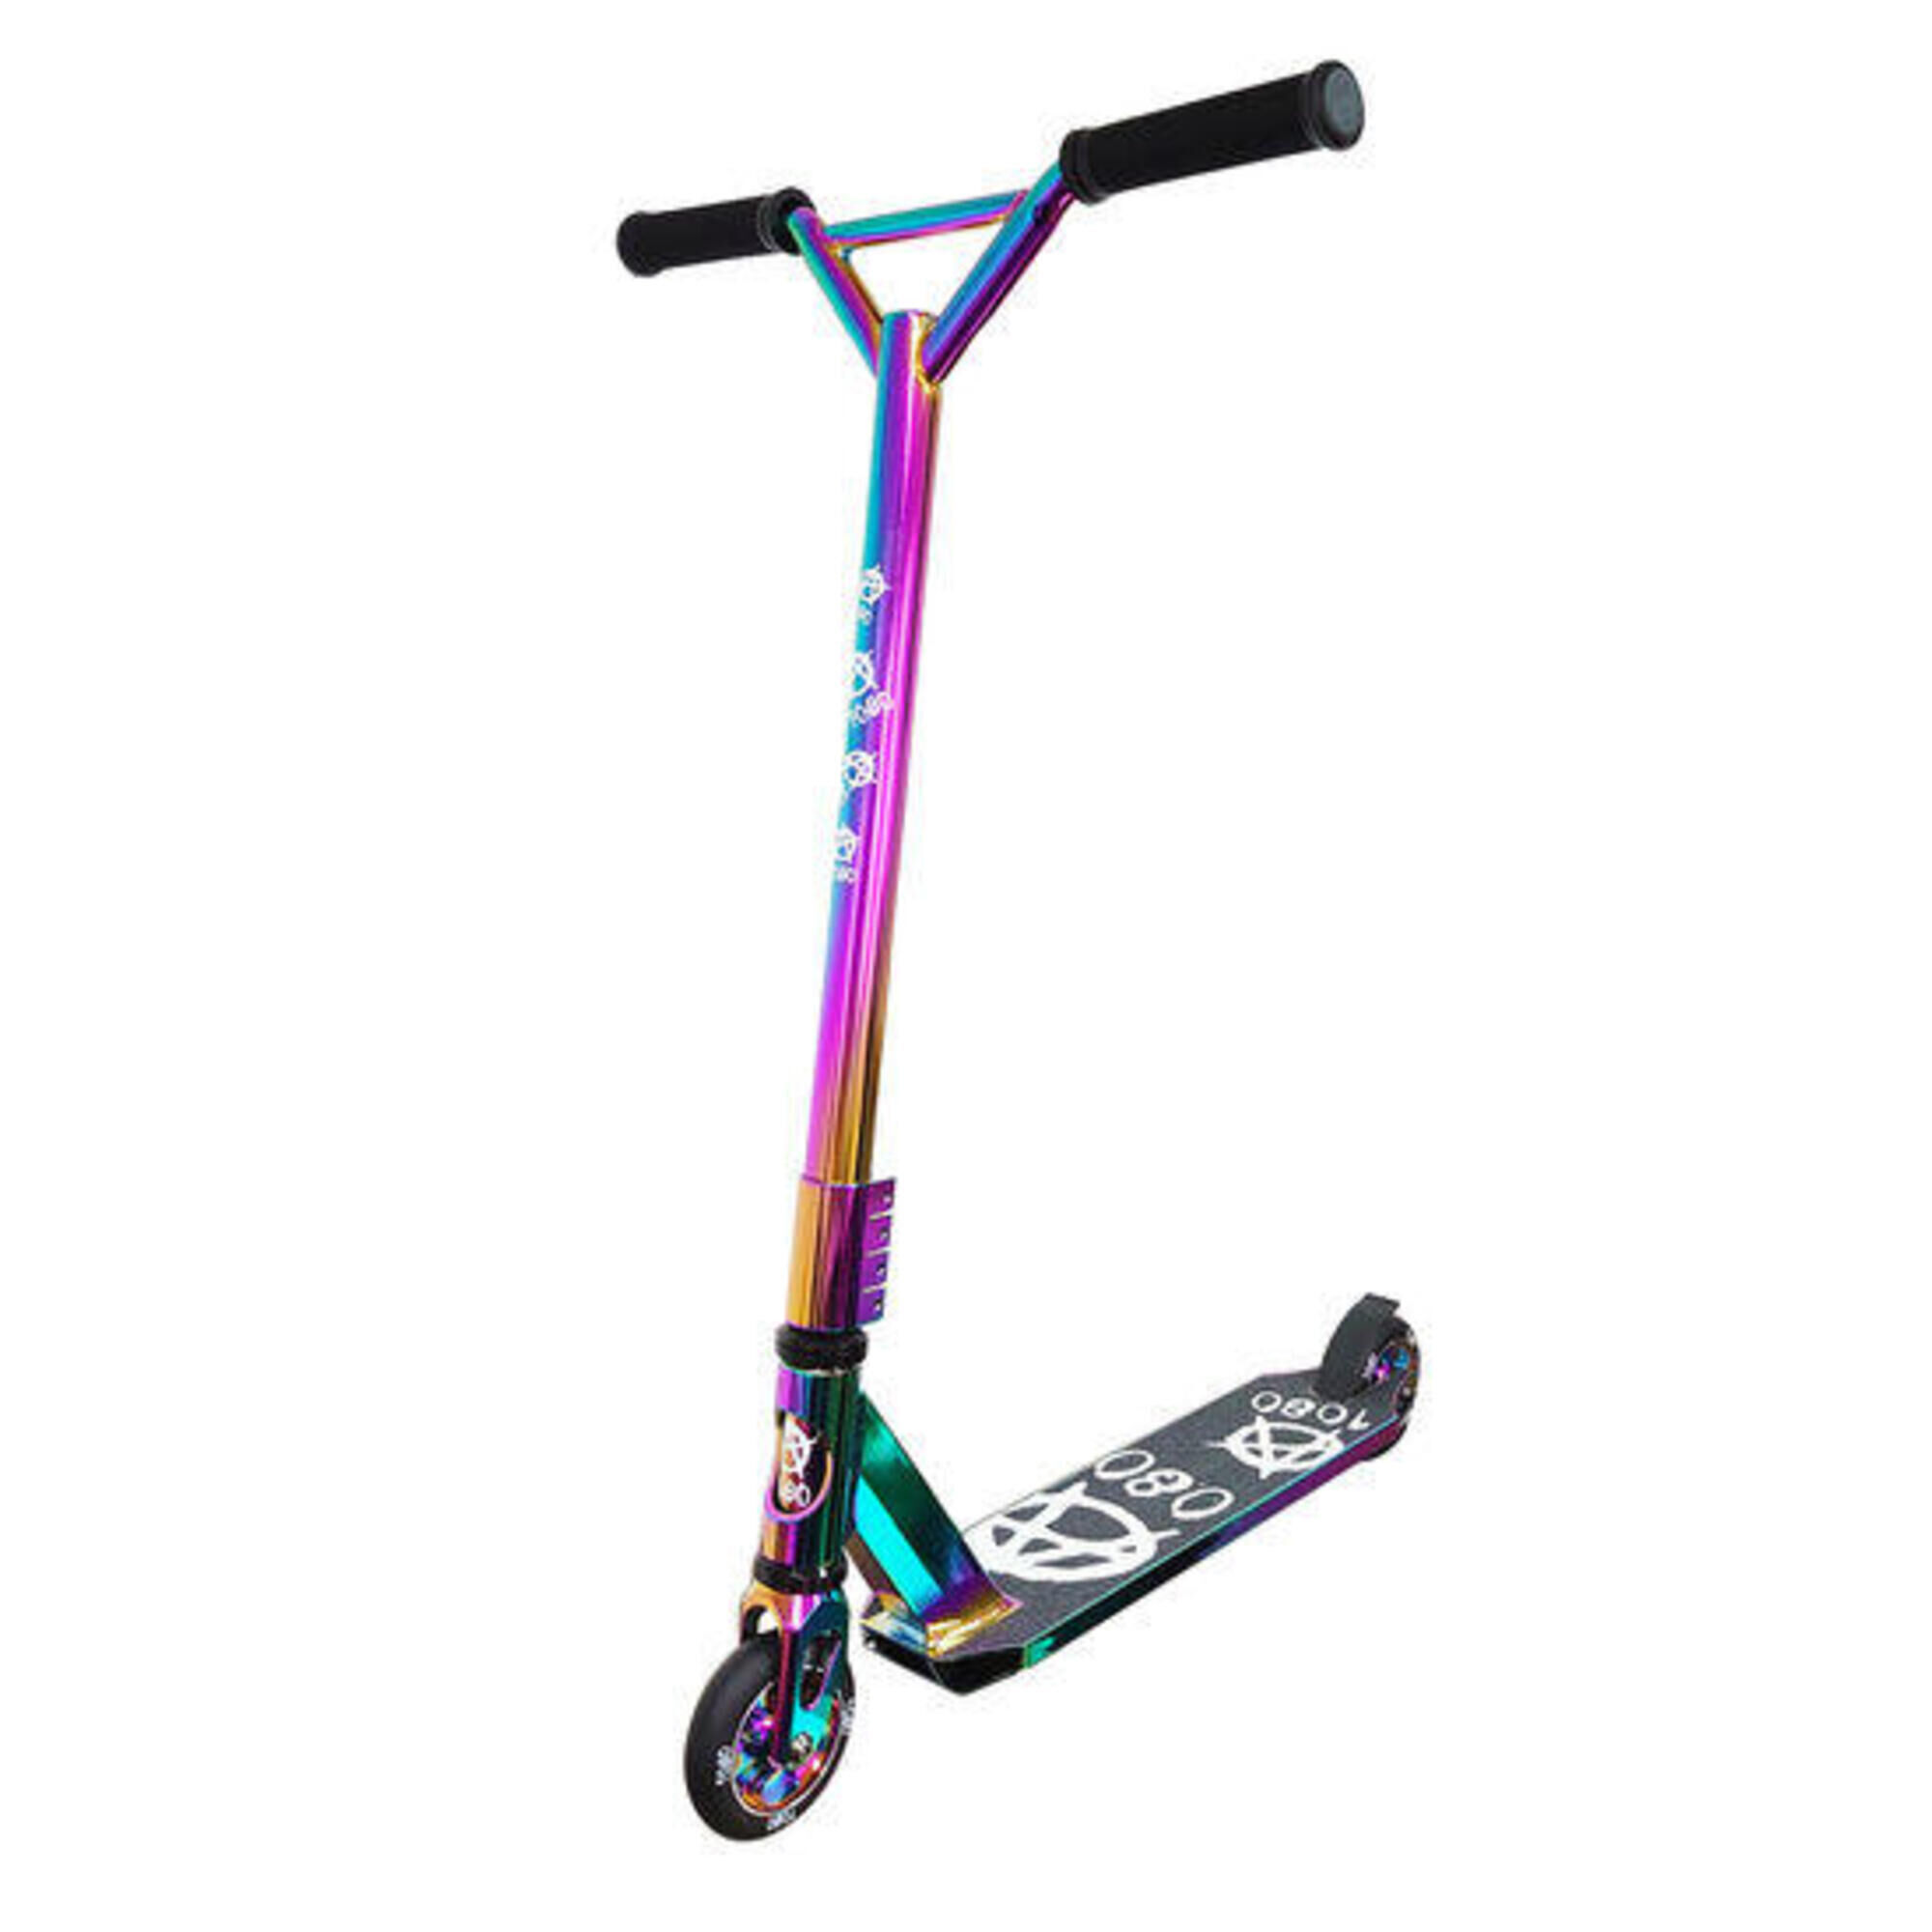 XN 1080 NeoChrome Stunt Scooter, Limited Edition - Neo Chrome Jet Fuel